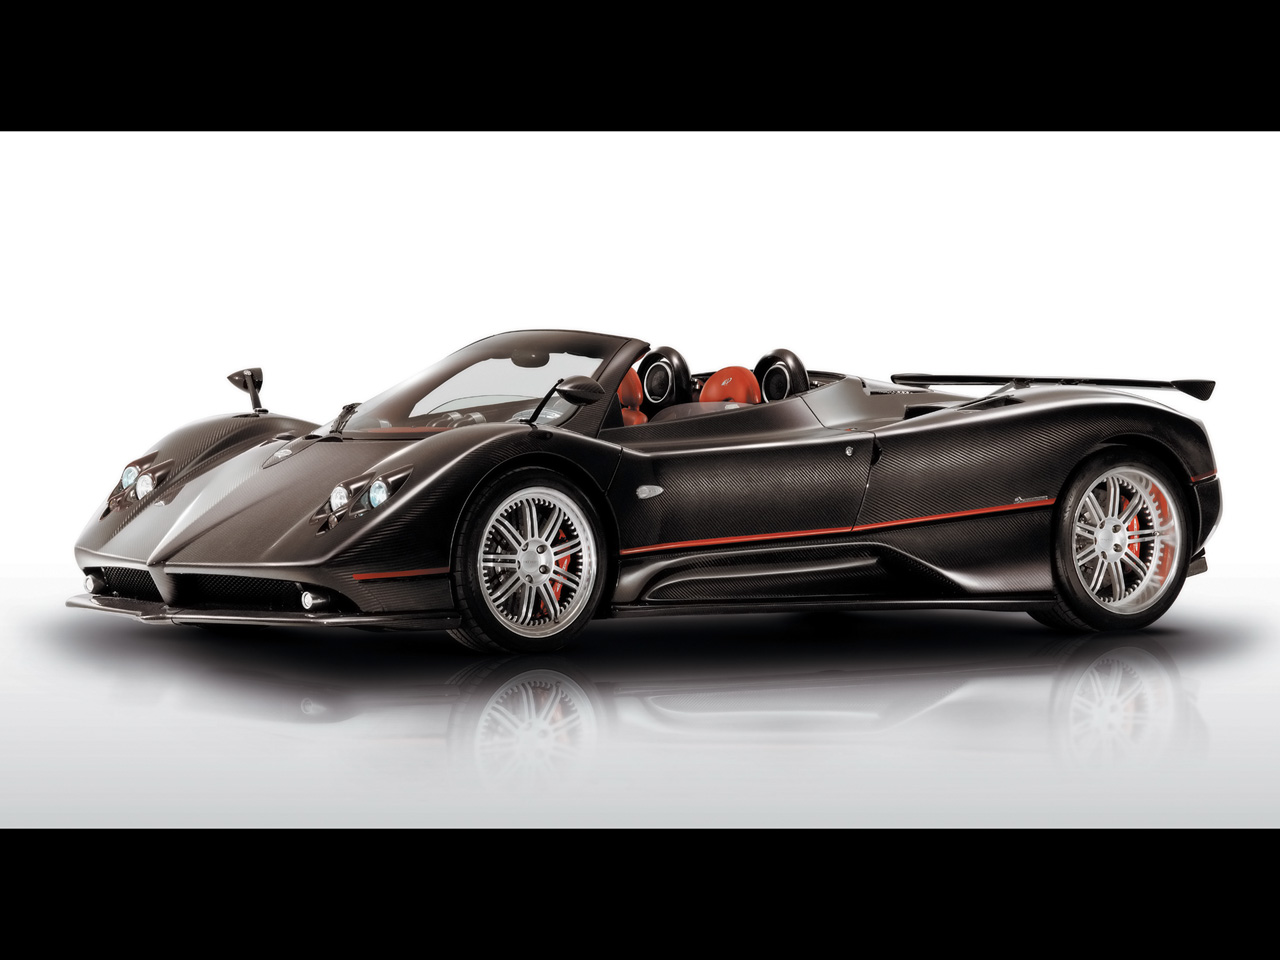 The Pagani Zonda and the Zonda R | The Leaky Gasket